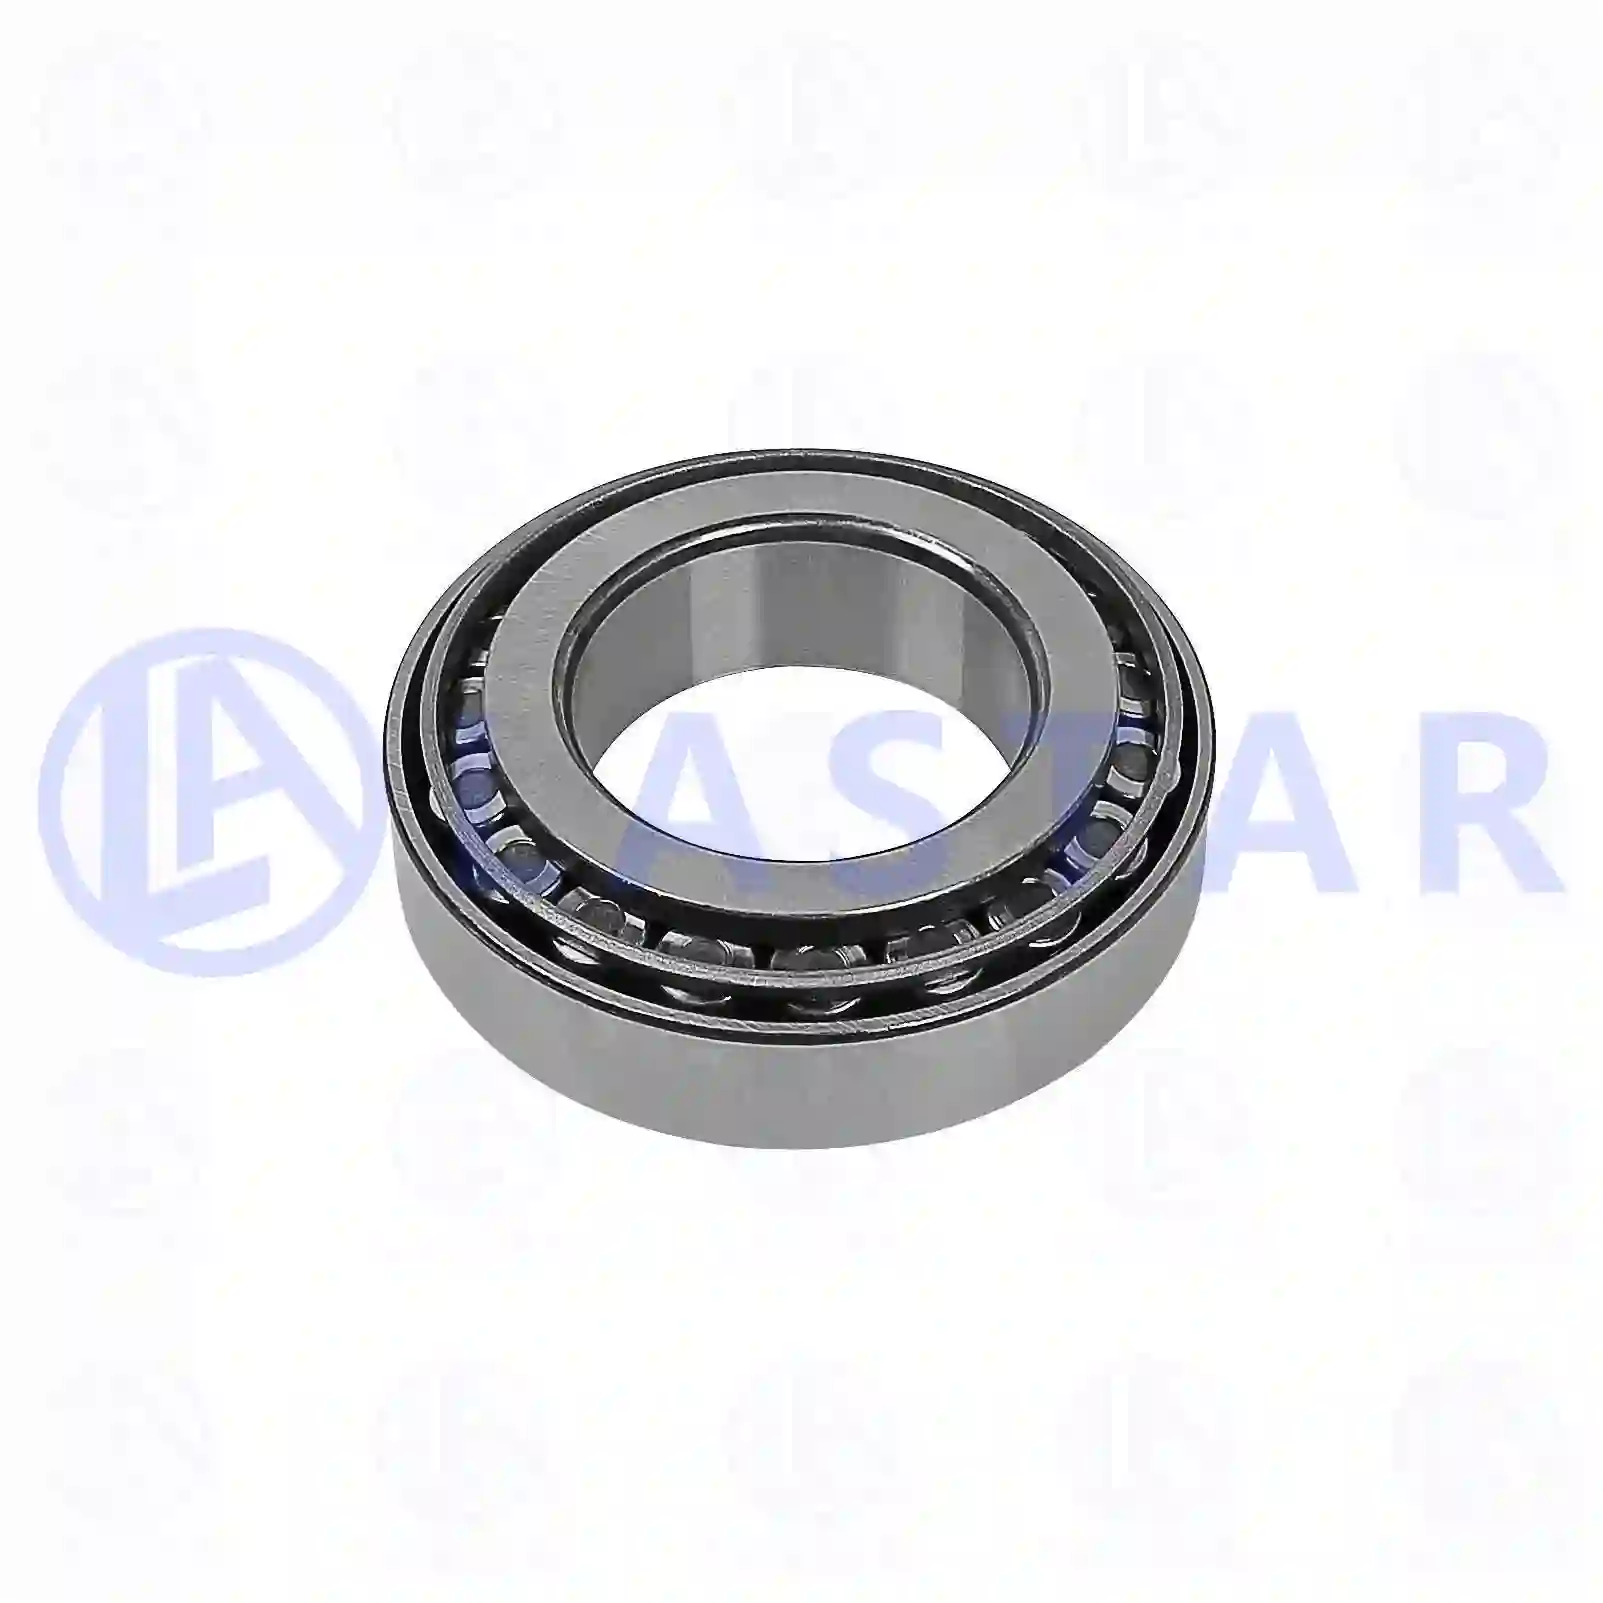 Gearbox Unit Tapered roller bearing, la no: 77732452 ,  oem no:0264056000, 1602388, 26800180, 10500481, 10500481, 710500481, 01110005, 01125573, 1110005, 1125573, 26800180, 06324990002, 0019812405, 0159819605, 0159819705, 0169811705, 18312-99M91, 0023432873, 0773221200, 0959532212, 7421626061, 4200002900, 1305878, 11075, 1652099, 21626061 Lastar Spare Part | Truck Spare Parts, Auotomotive Spare Parts